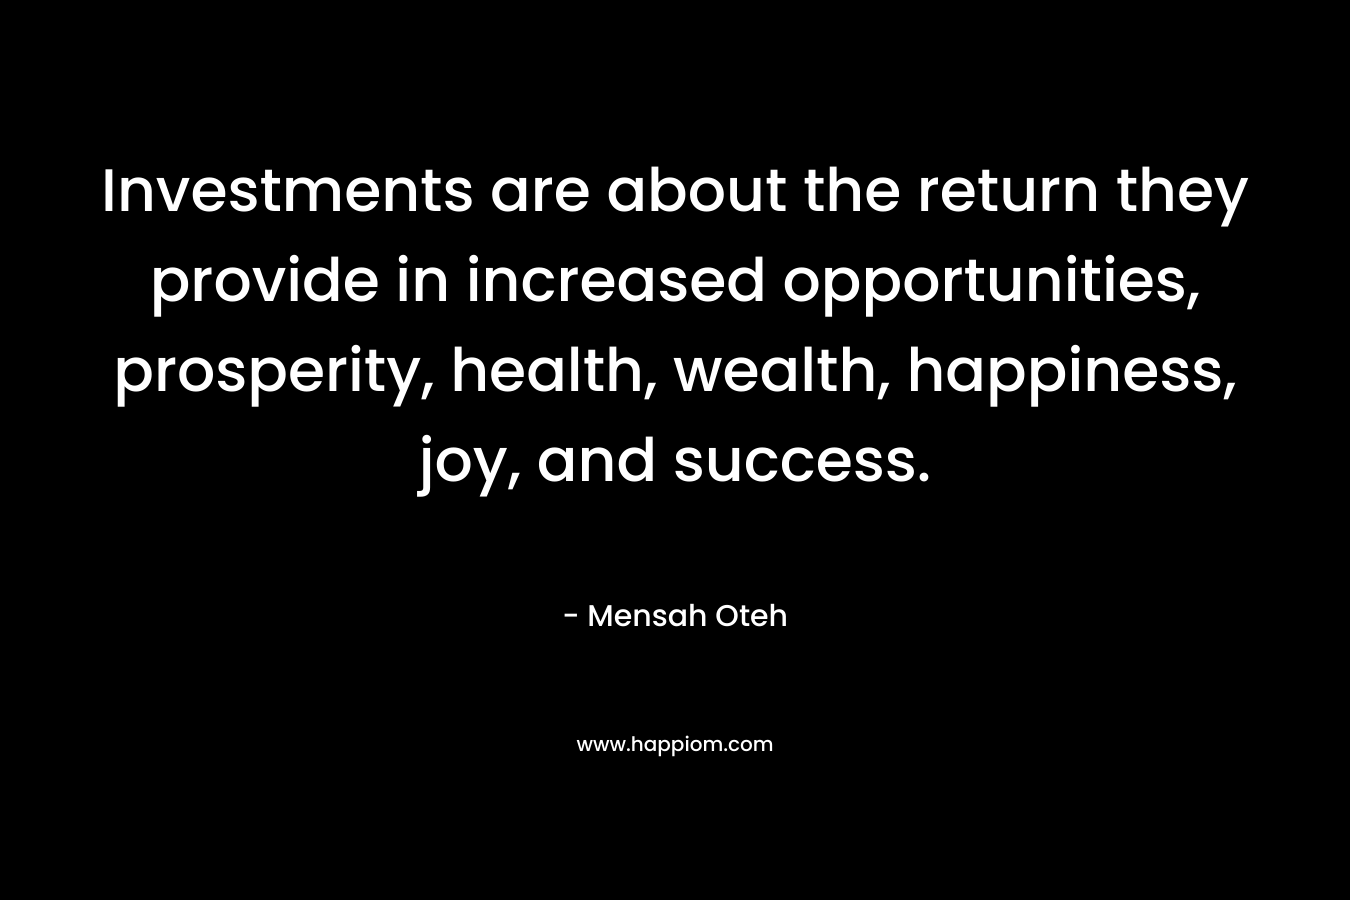 Investments are about the return they provide in increased opportunities, prosperity, health, wealth, happiness, joy, and success.